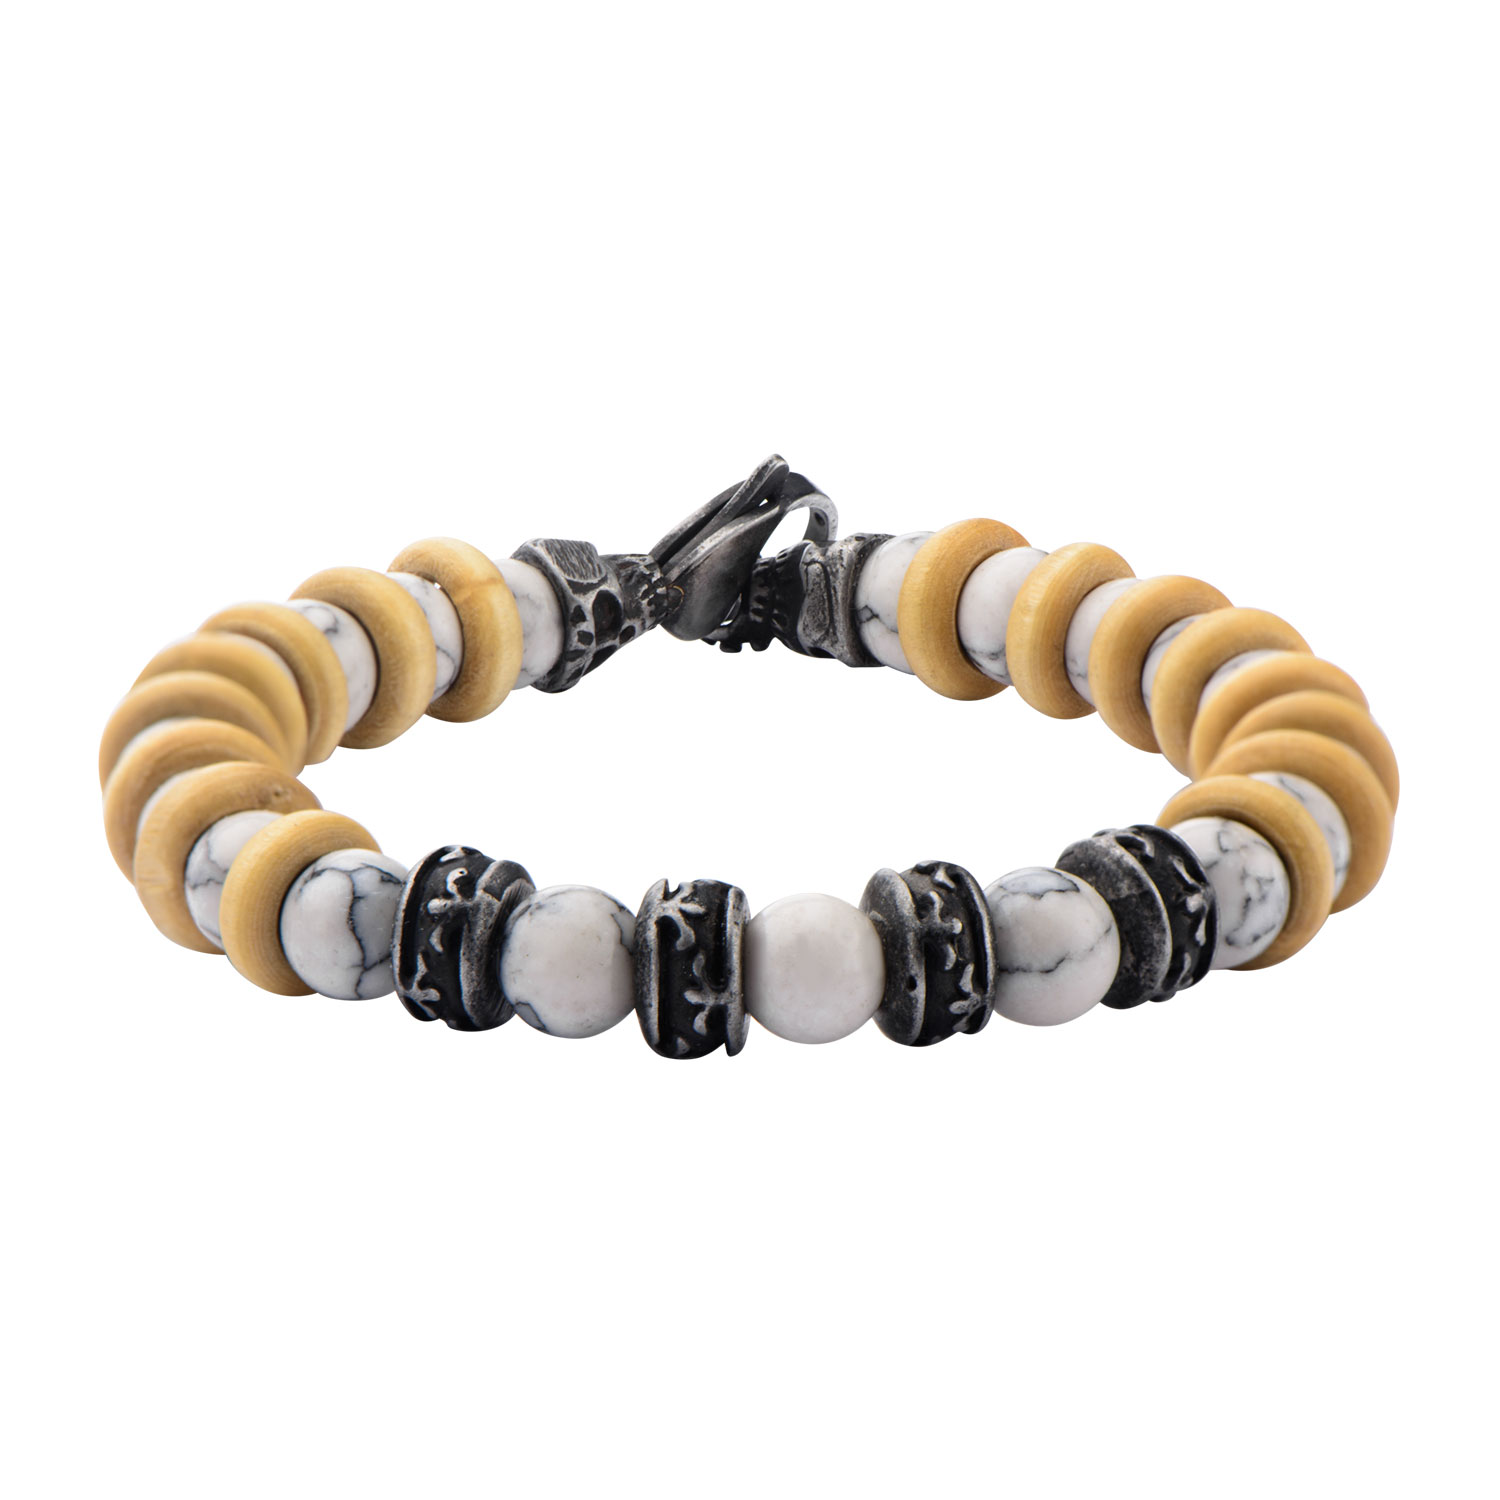 8mm White Howlite Beads with Taupe Wood Separators Bracelet Lewis Jewelers, Inc. Ansonia, CT